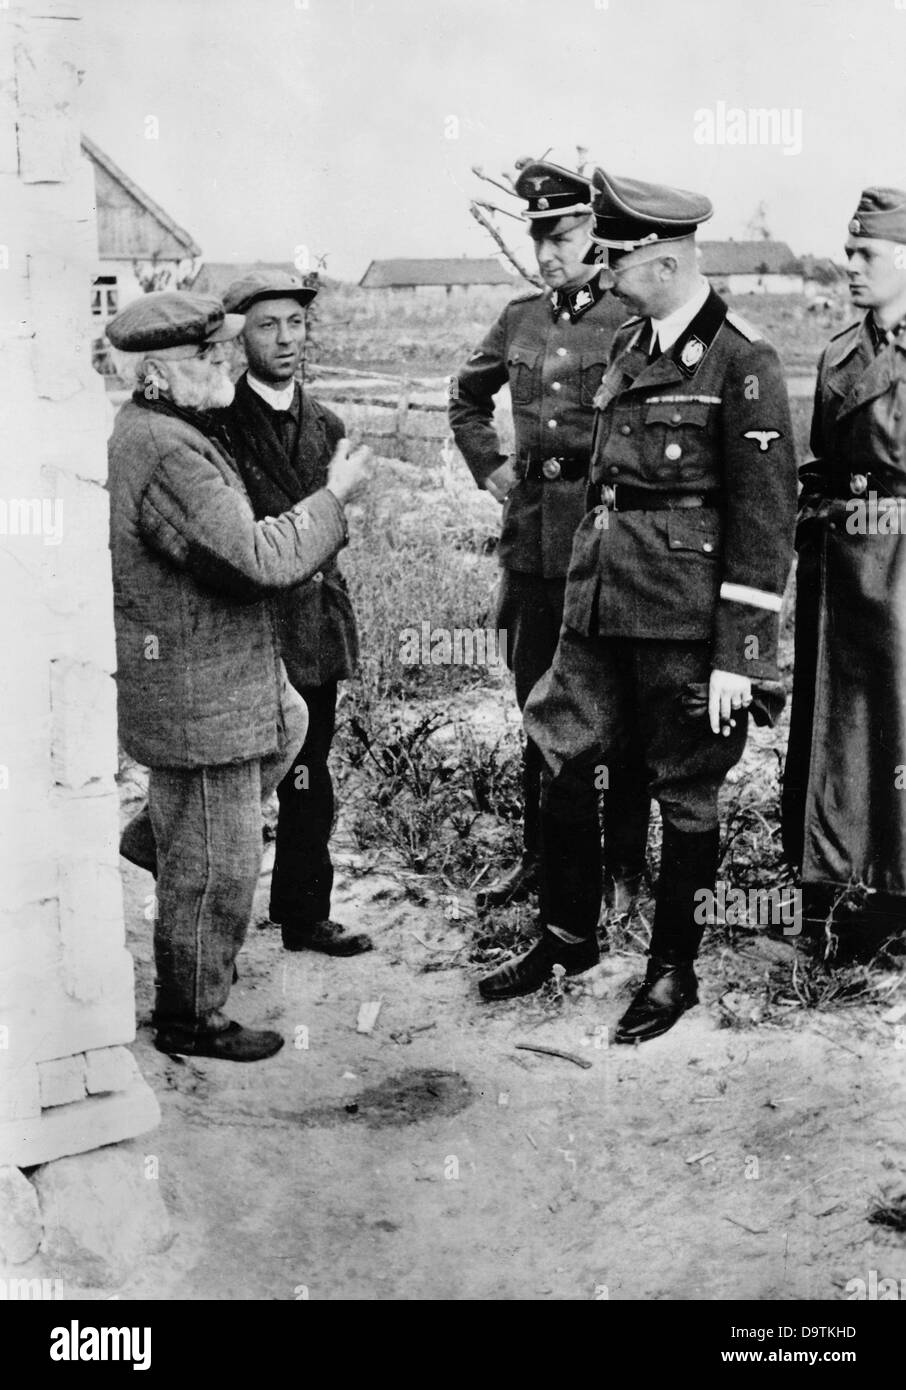 Field Marshal of the SS and Chief of German Police, Heinrich Himmler, talks to locals at the Eastern Front. The Nazi Propaganda! on the back of the image is dated 26 November 1941: 'Reichsführer of the SS and Chief of German Police Heinrich Himmler untertook a tour of inspection on the Eastern Front. In a German village in the Soviet area, he stopped and talked intensively with the villagers about their suffering under the gruesome yoke of Bolshevism.' Fotoarchiv für Zeitgeschichte Stock Photo